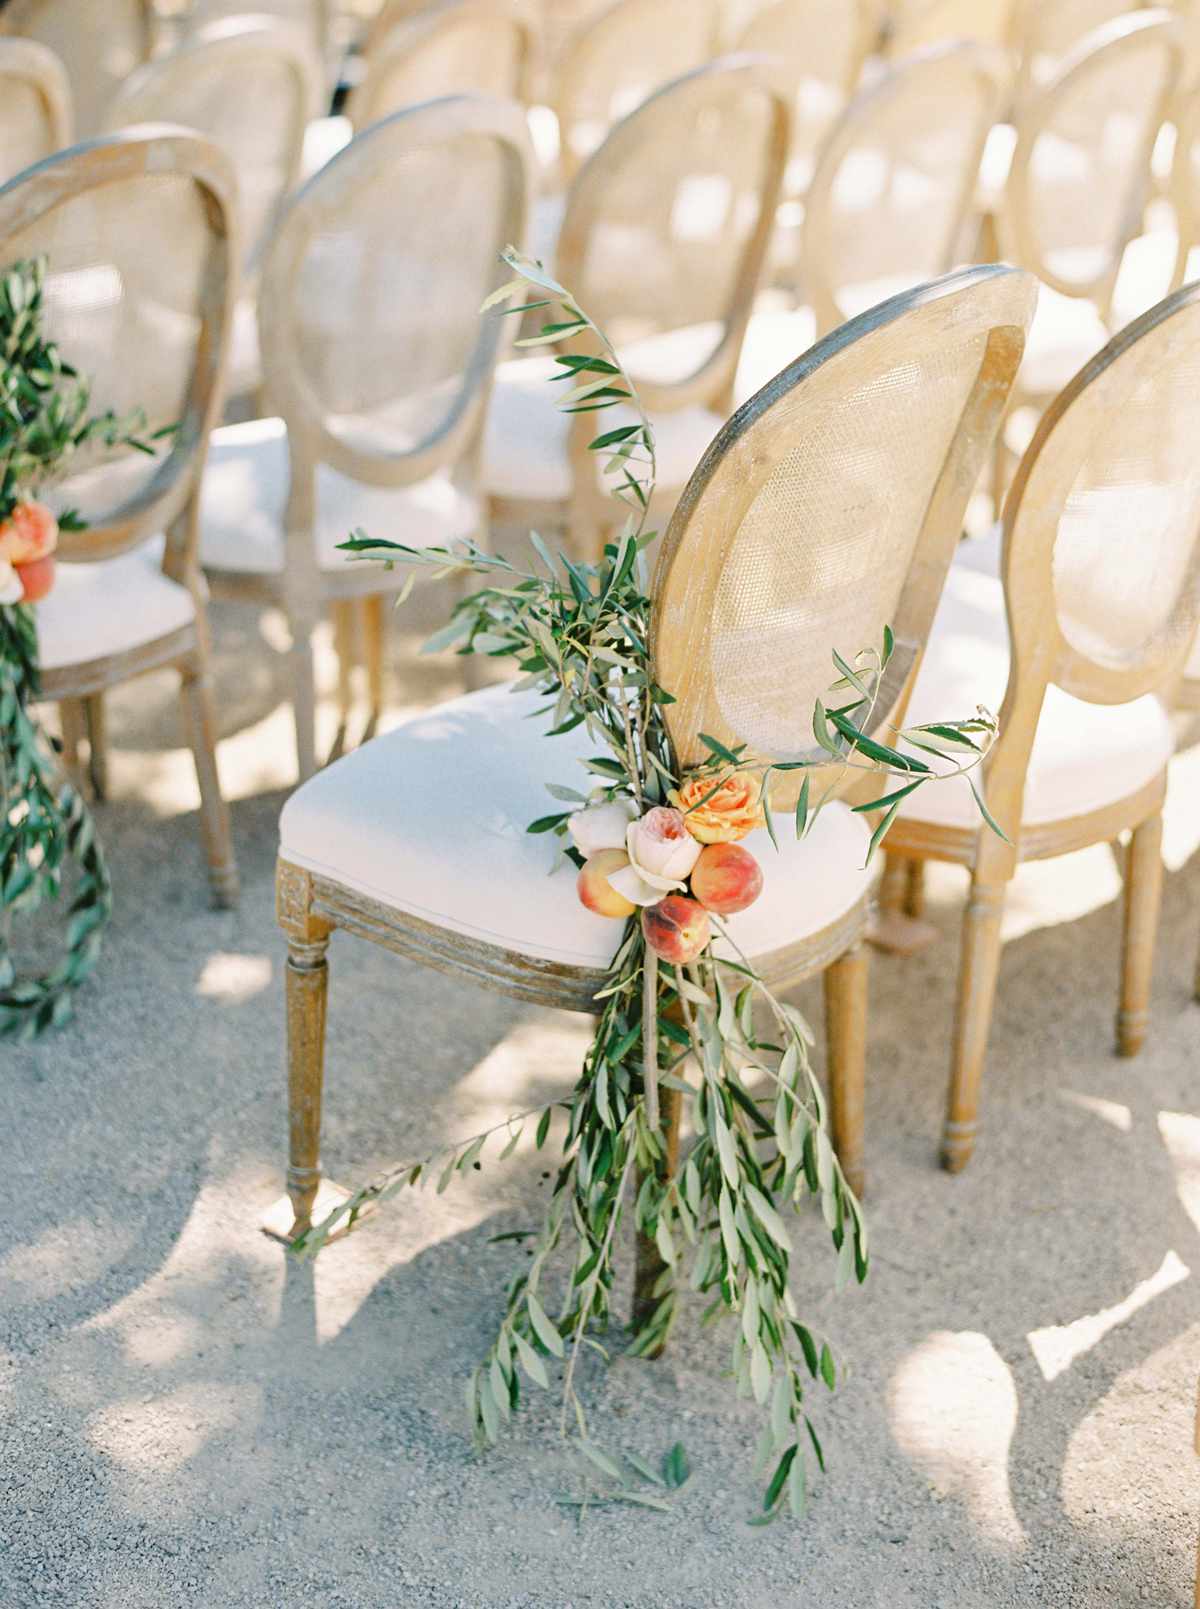 outer aisle chairs decorated with roses peaches and olive branches